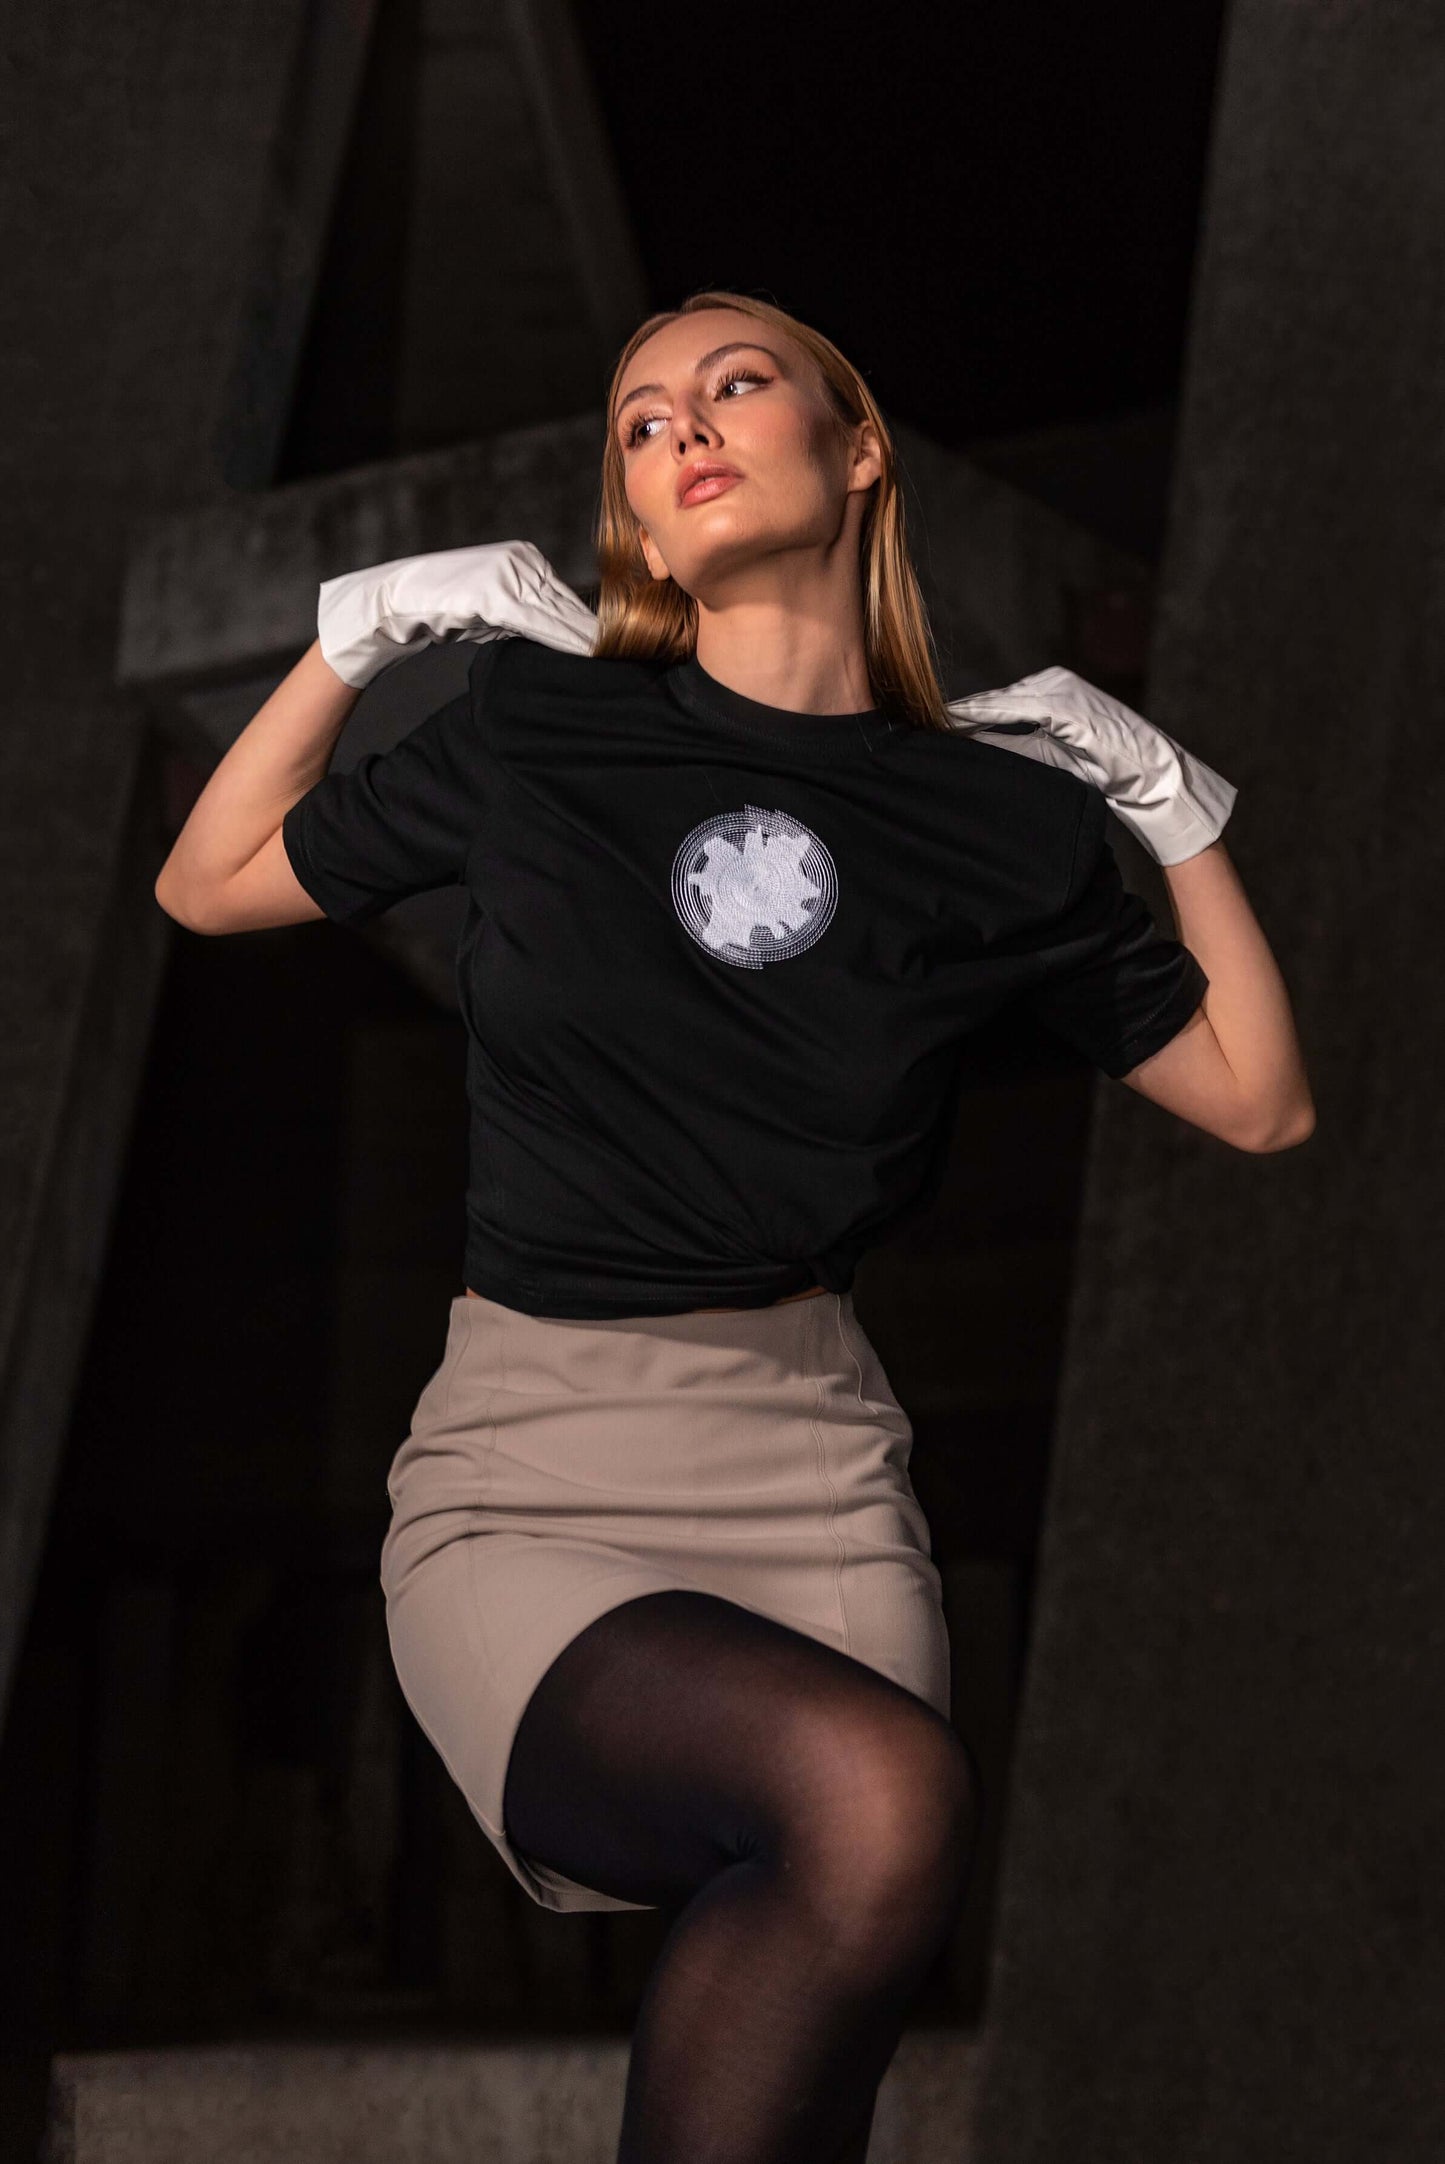 The model wears a black, oversized silhouette t-shirt with spiral embroidery in white. The outfit also contains a short skirt, gloves, tights and short, high-heel boots, complimenting the black t-shirt with white spiral embroidery. An editorial photograph of it in an architectural monument in Plovdiv, Bulgaria.